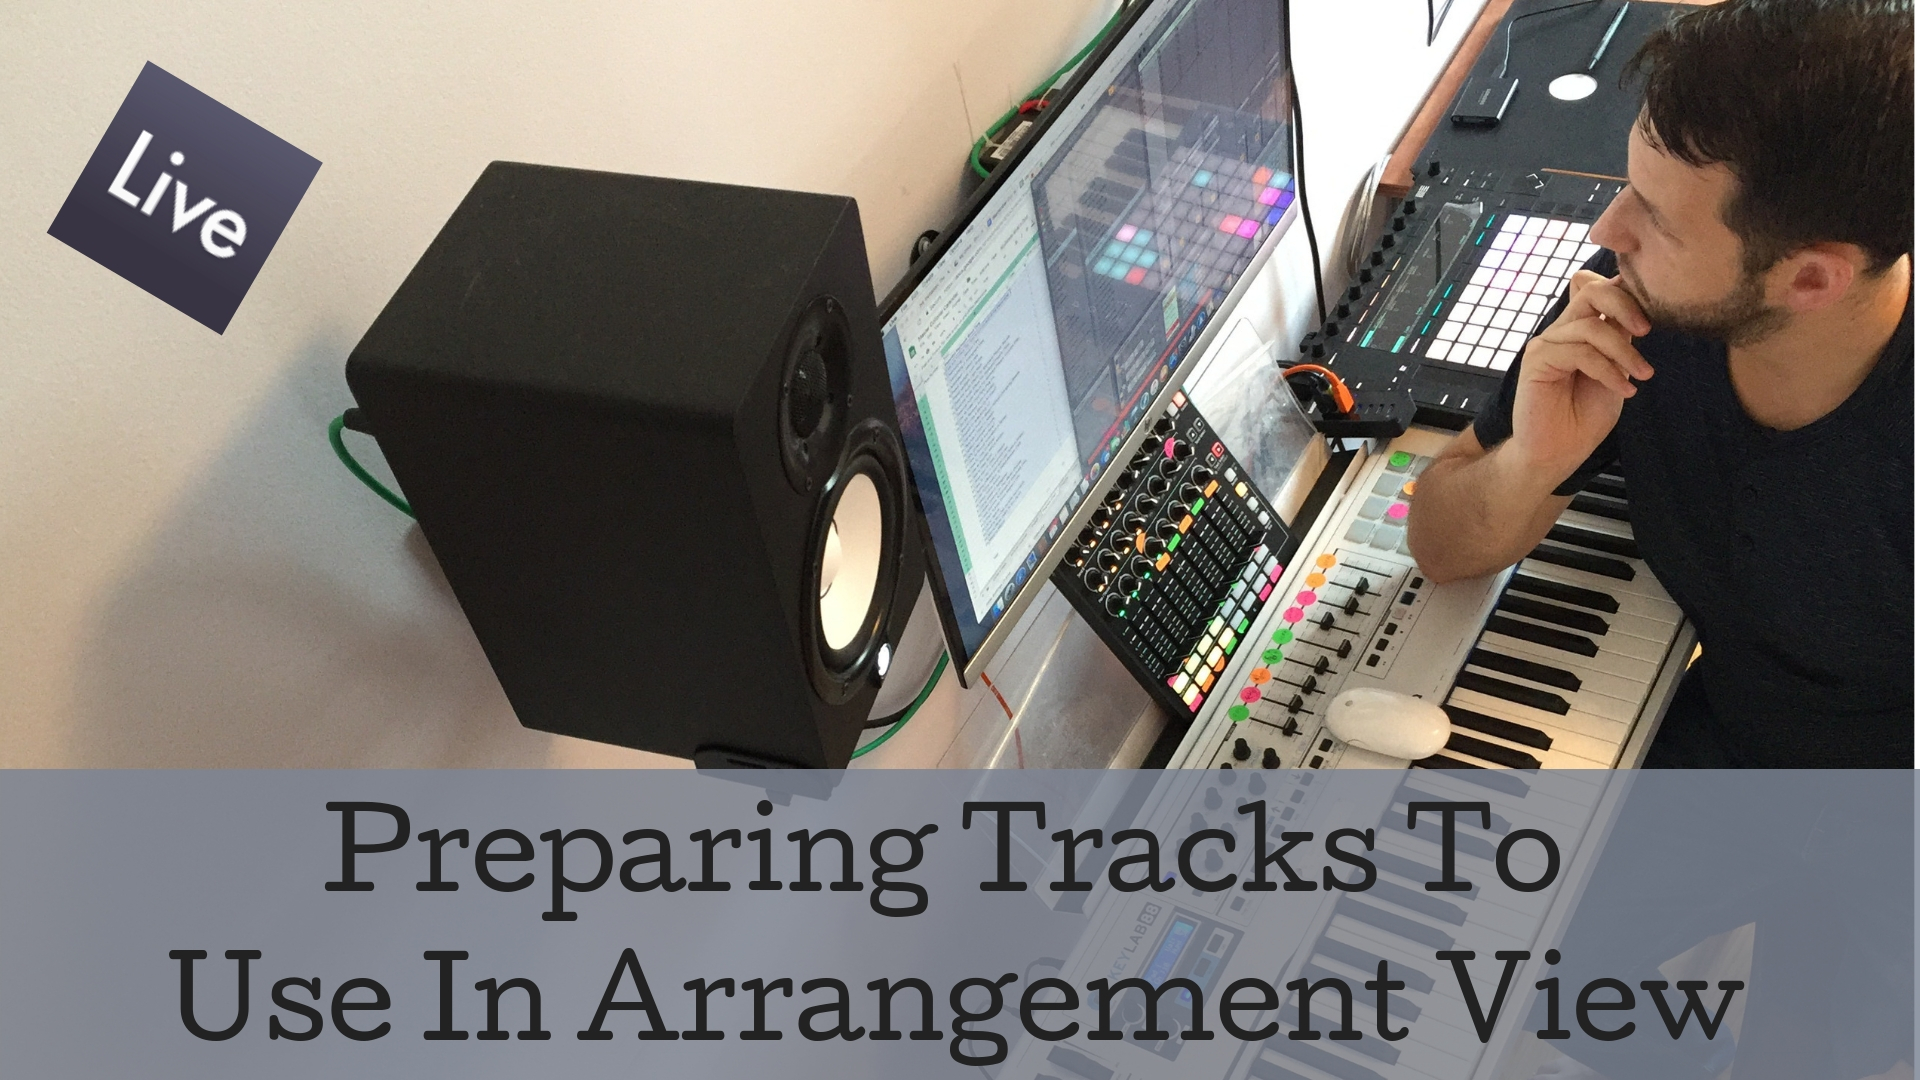 Prepping Multi Tracks For Use In Arrangement View